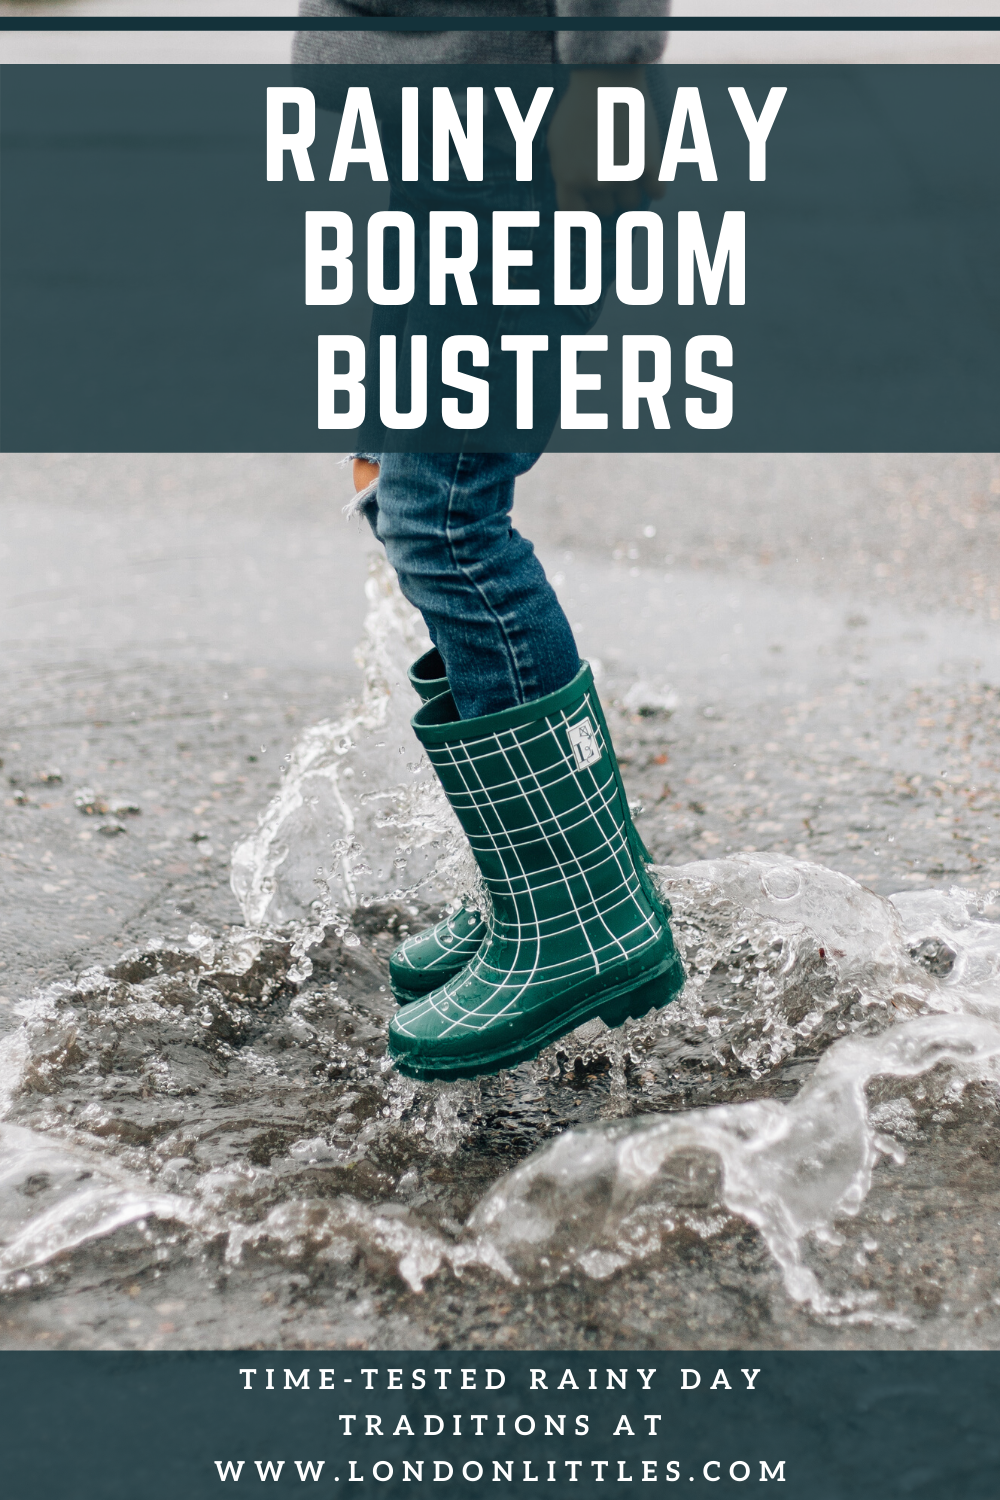 favorite rainy day boredom busters for kids boy splashing in puddle with rain boots